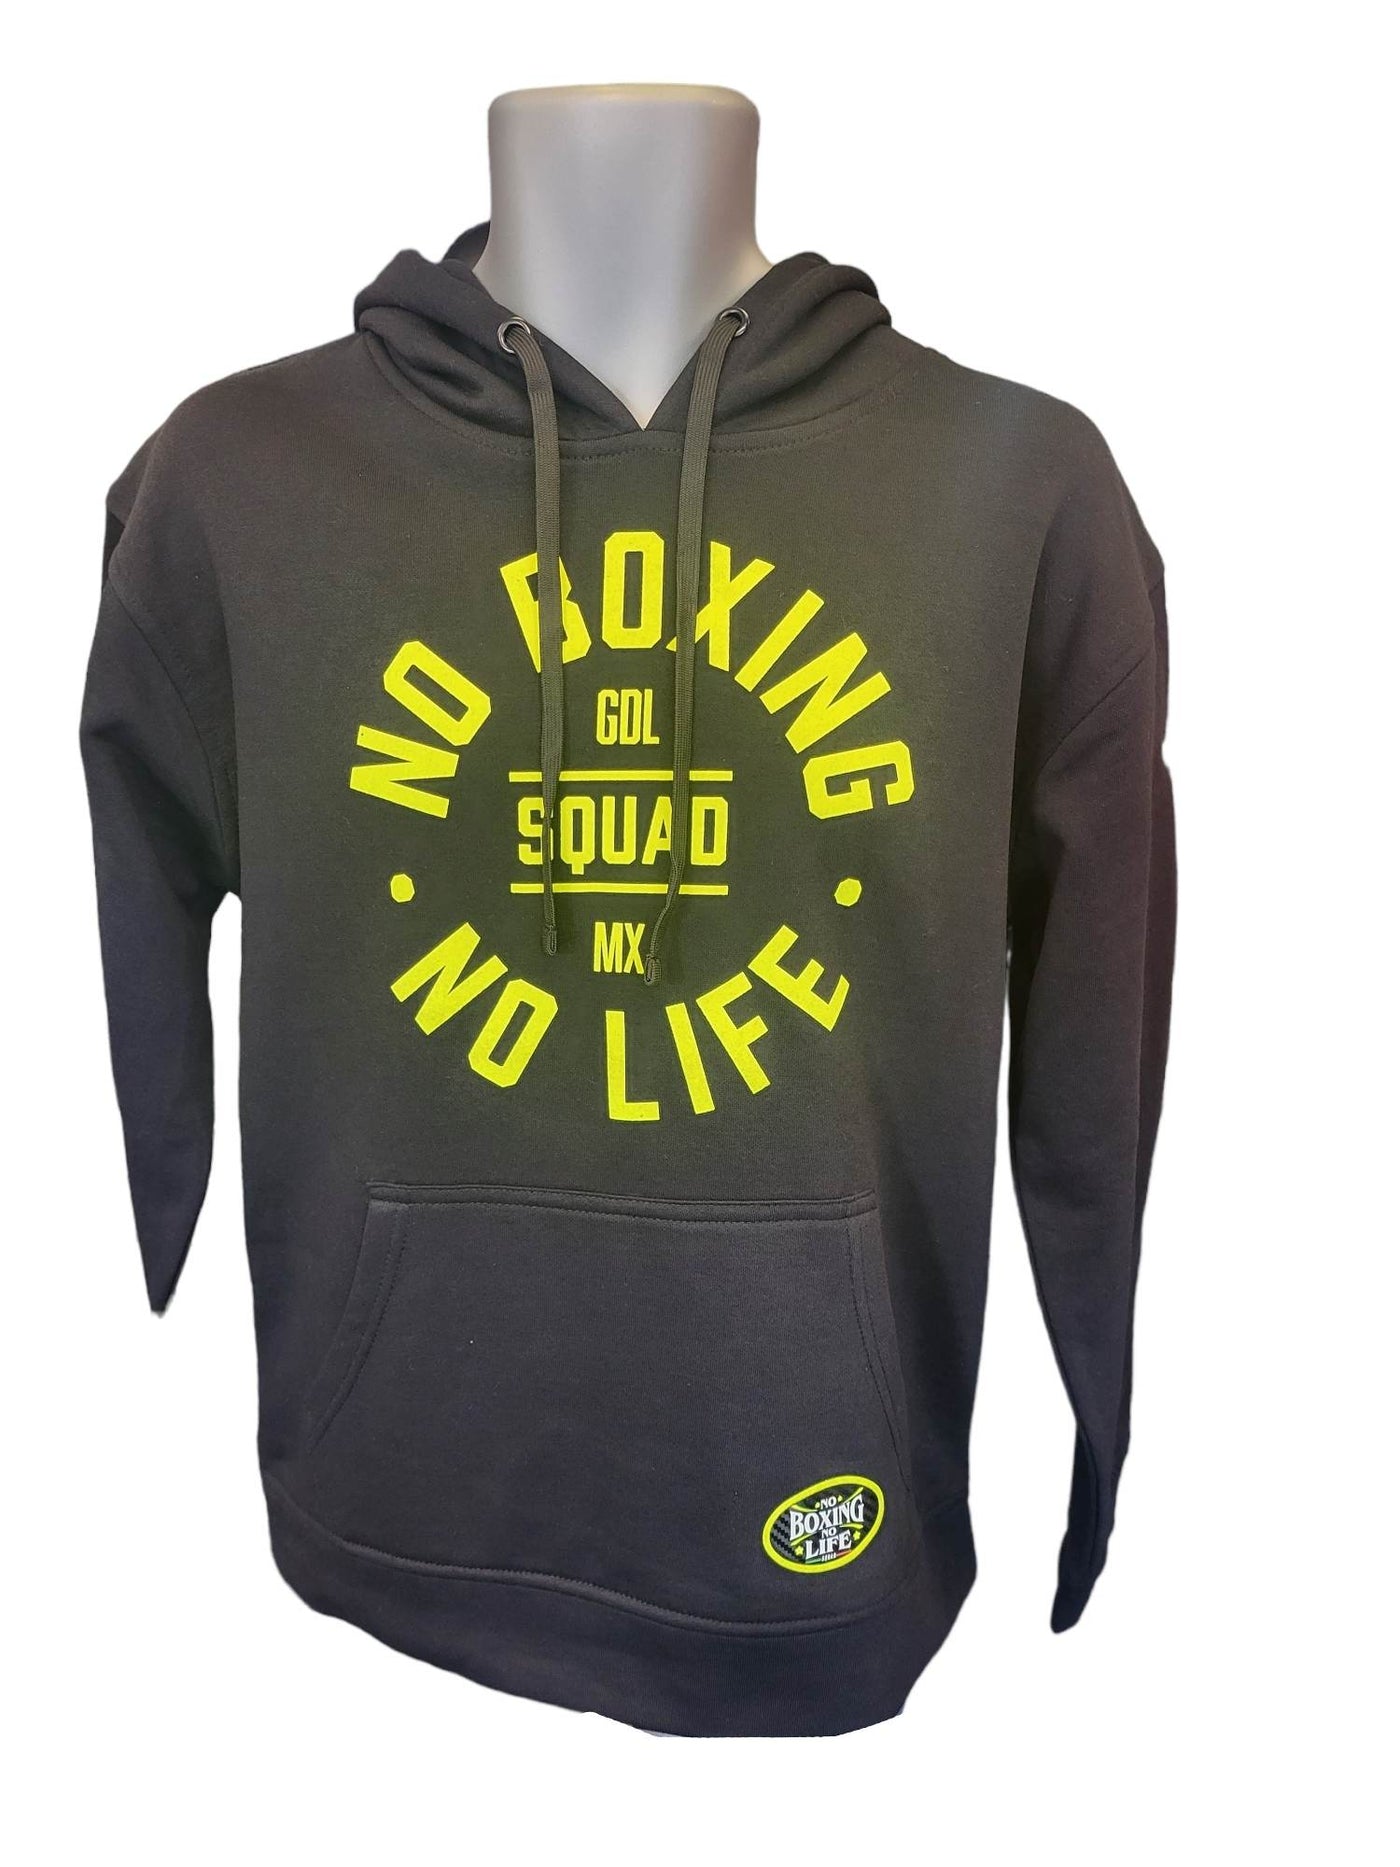 Official No Boxing No Life GDL MX SQUAD Hoodie - Black/ Green